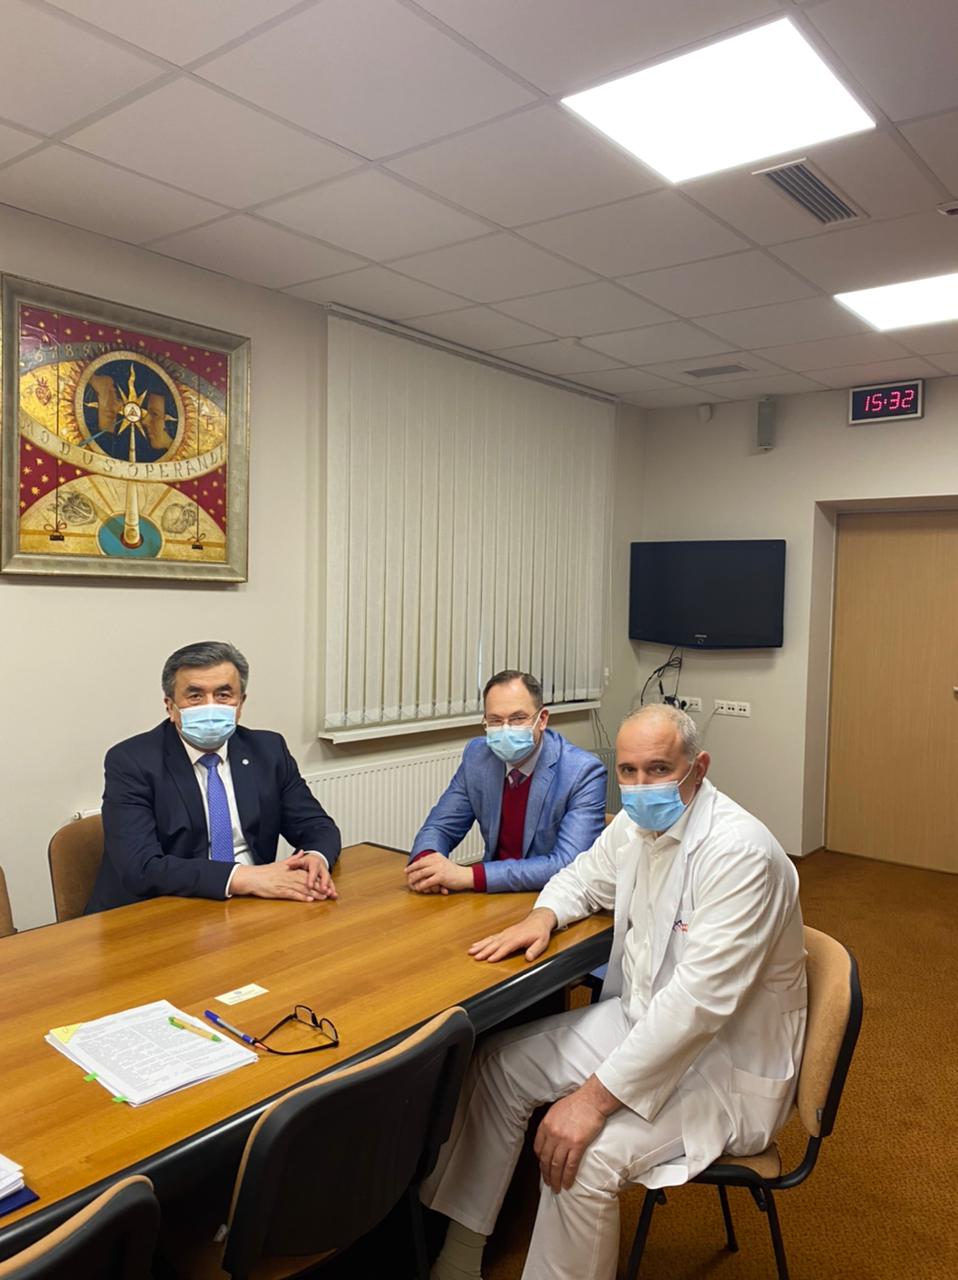 On April 20, 2021, Ambassador Extraordinary and Plenipotentiary of the Kyrgyz Republic to Ukraine Zhusupbek Sharipov visited a specialized clinic 